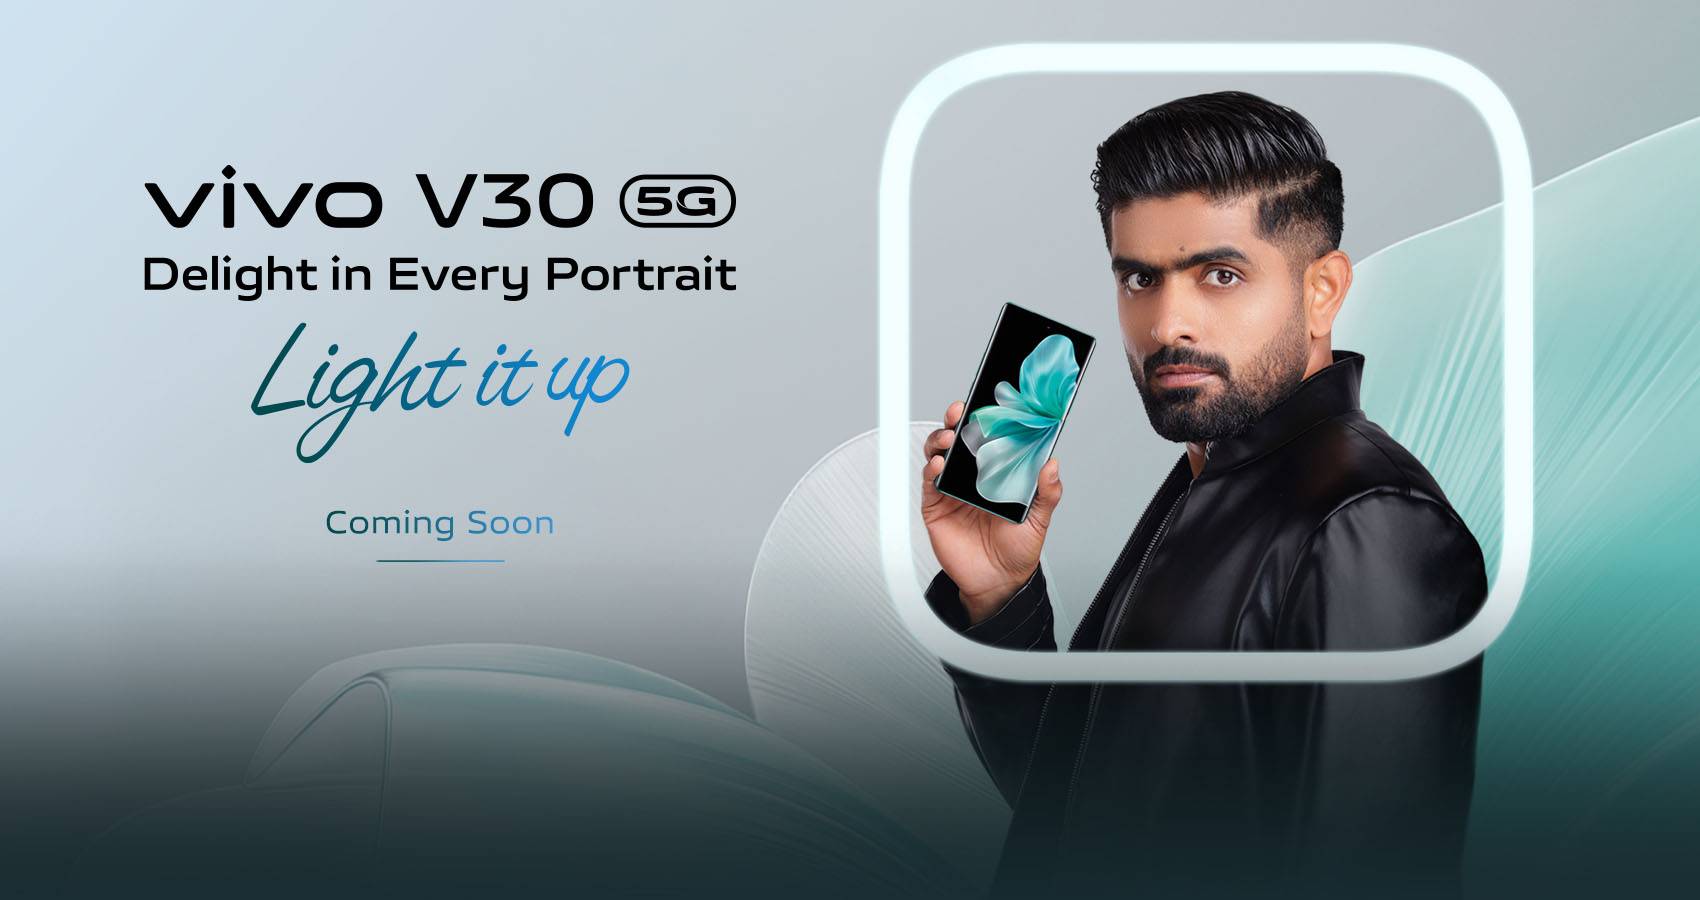 Babar Azam Renews Partnership with vivo for the Highly Anticipated Launch of V30 5G Smartphone